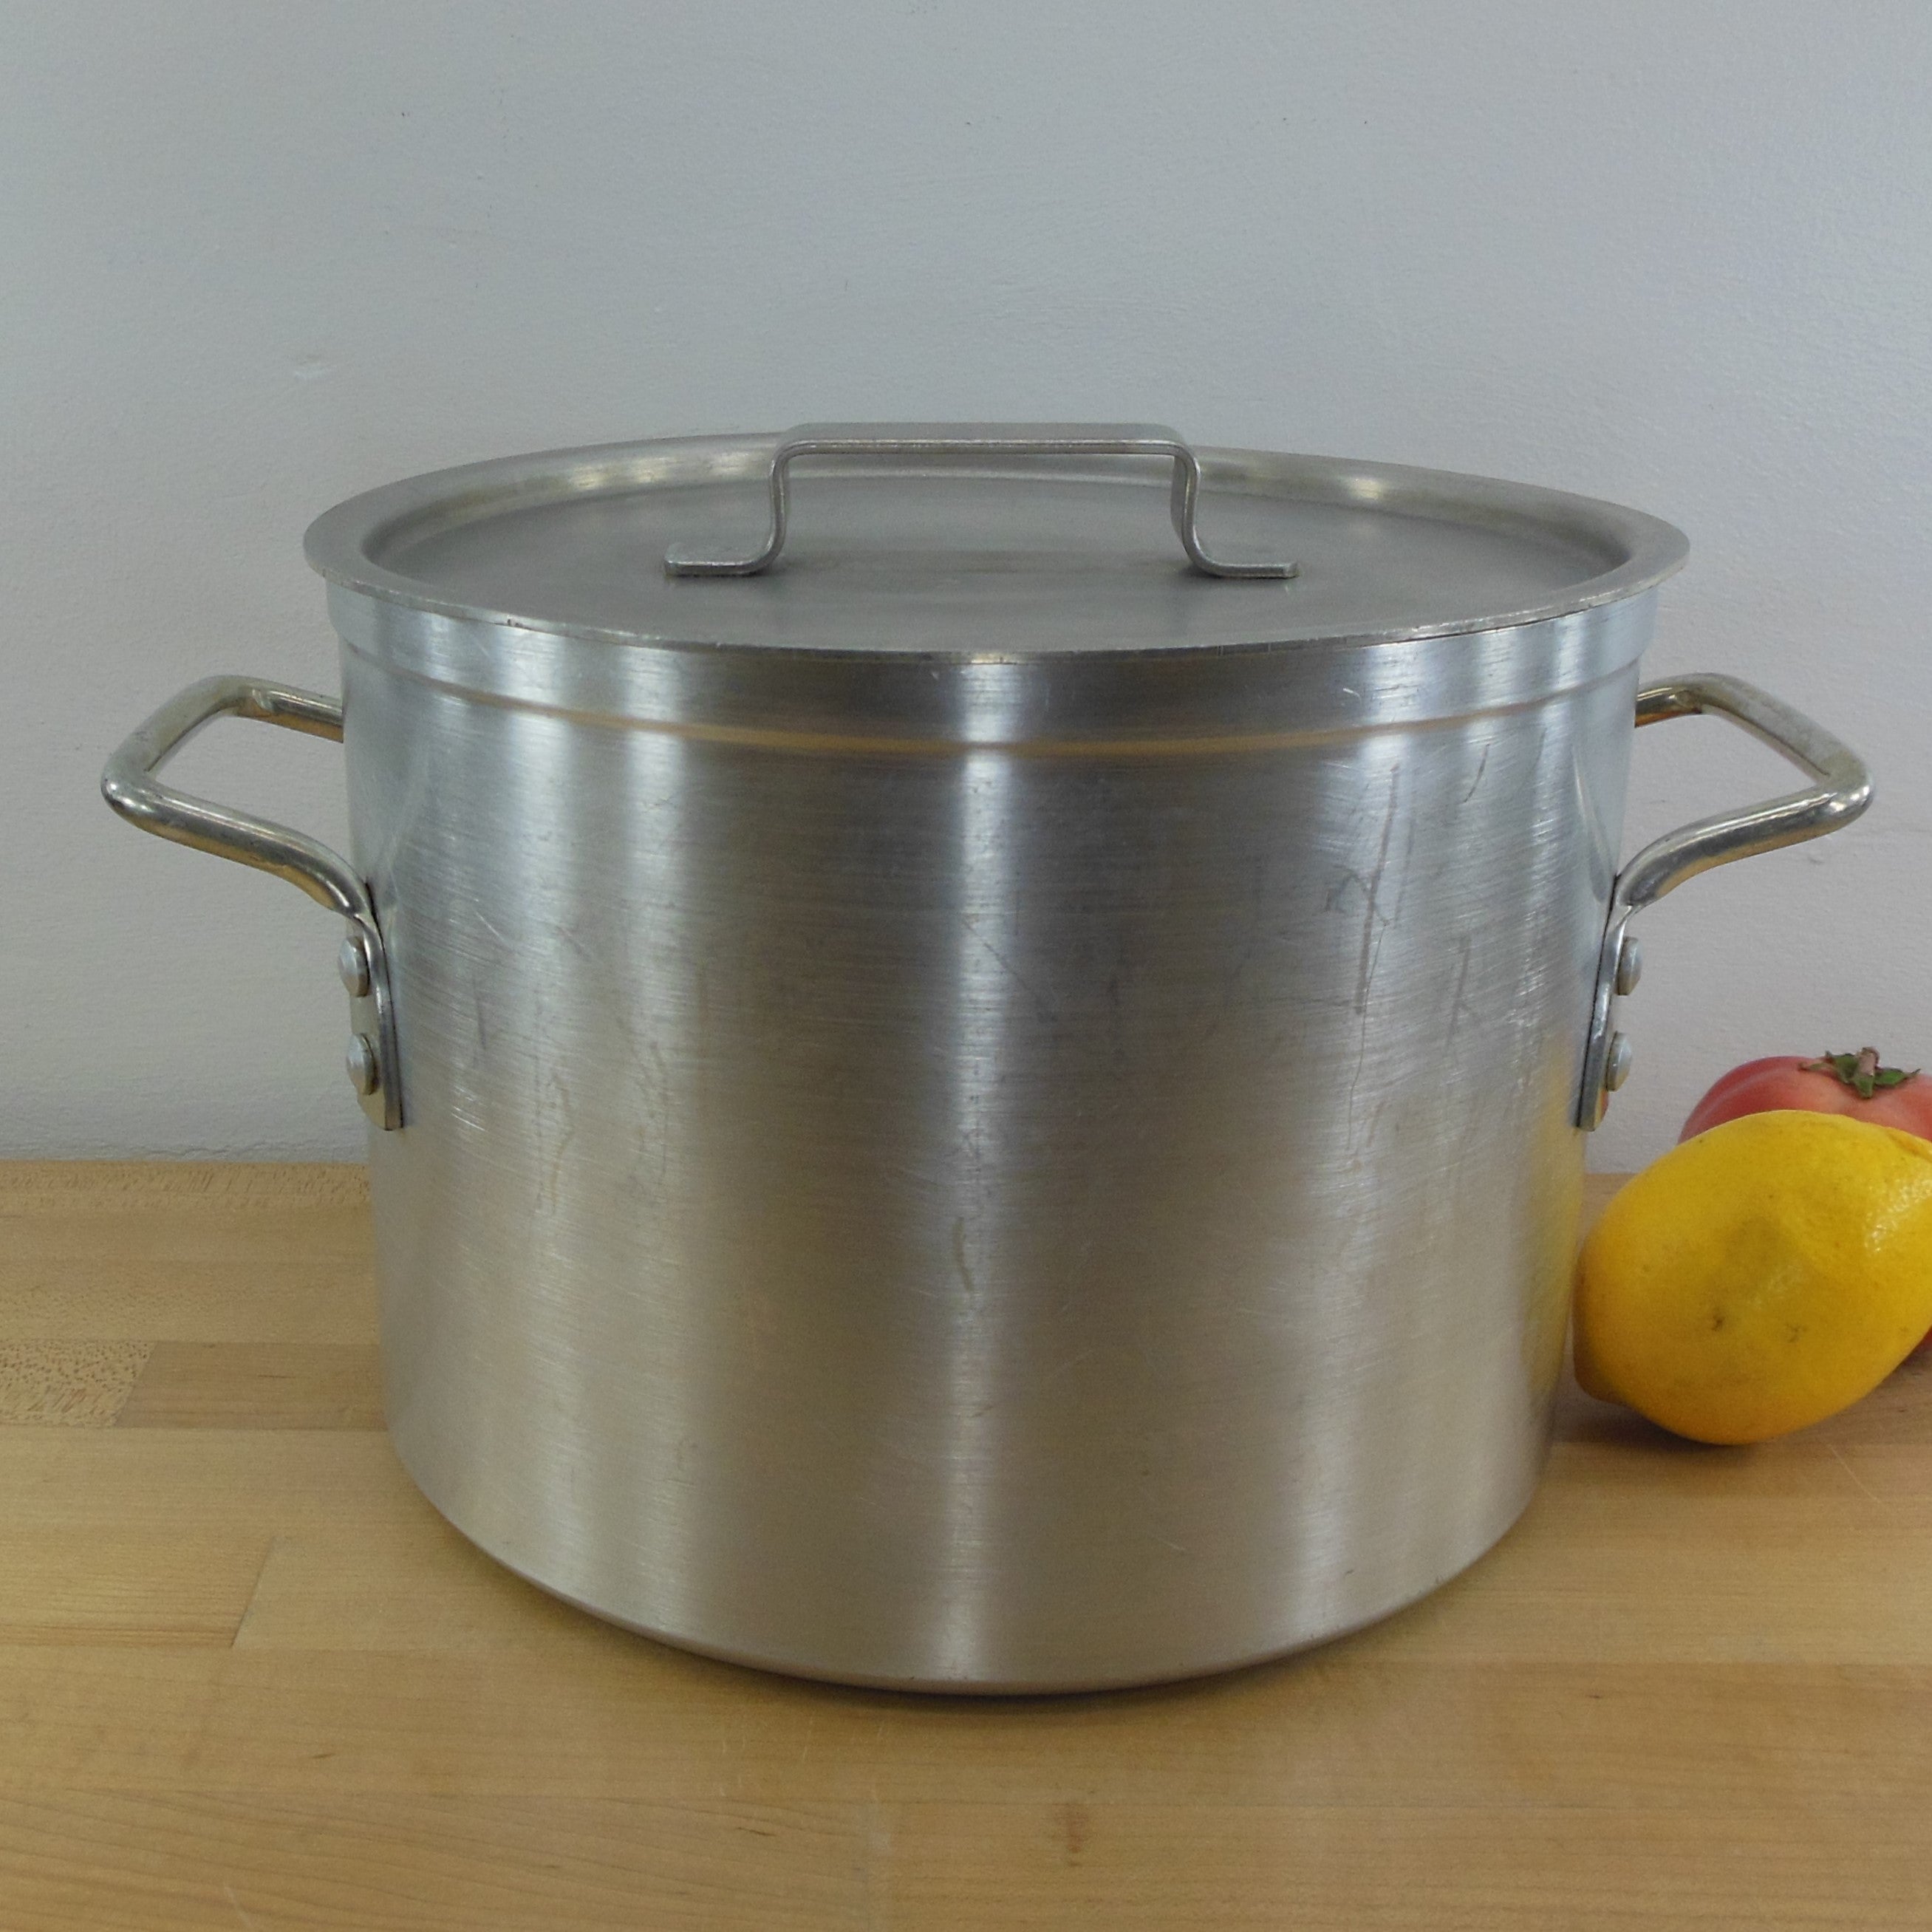 Vintage Toroware By Leyse 12 Qt Aluminum Stockpot No 5312 With Lid